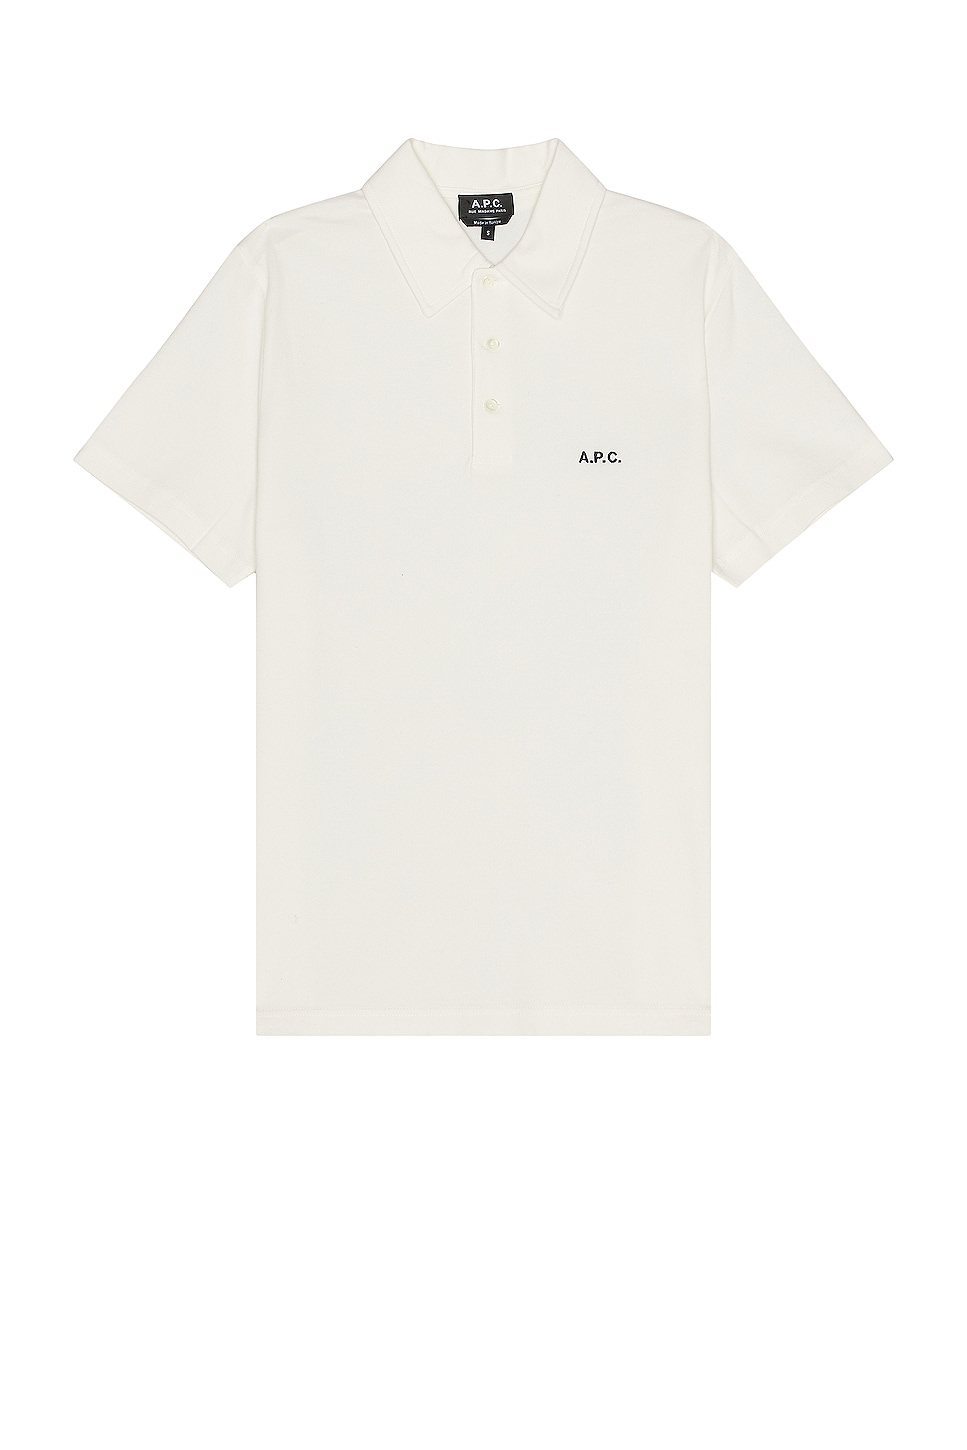 Image 1 of A.P.C. Austin Polo in White